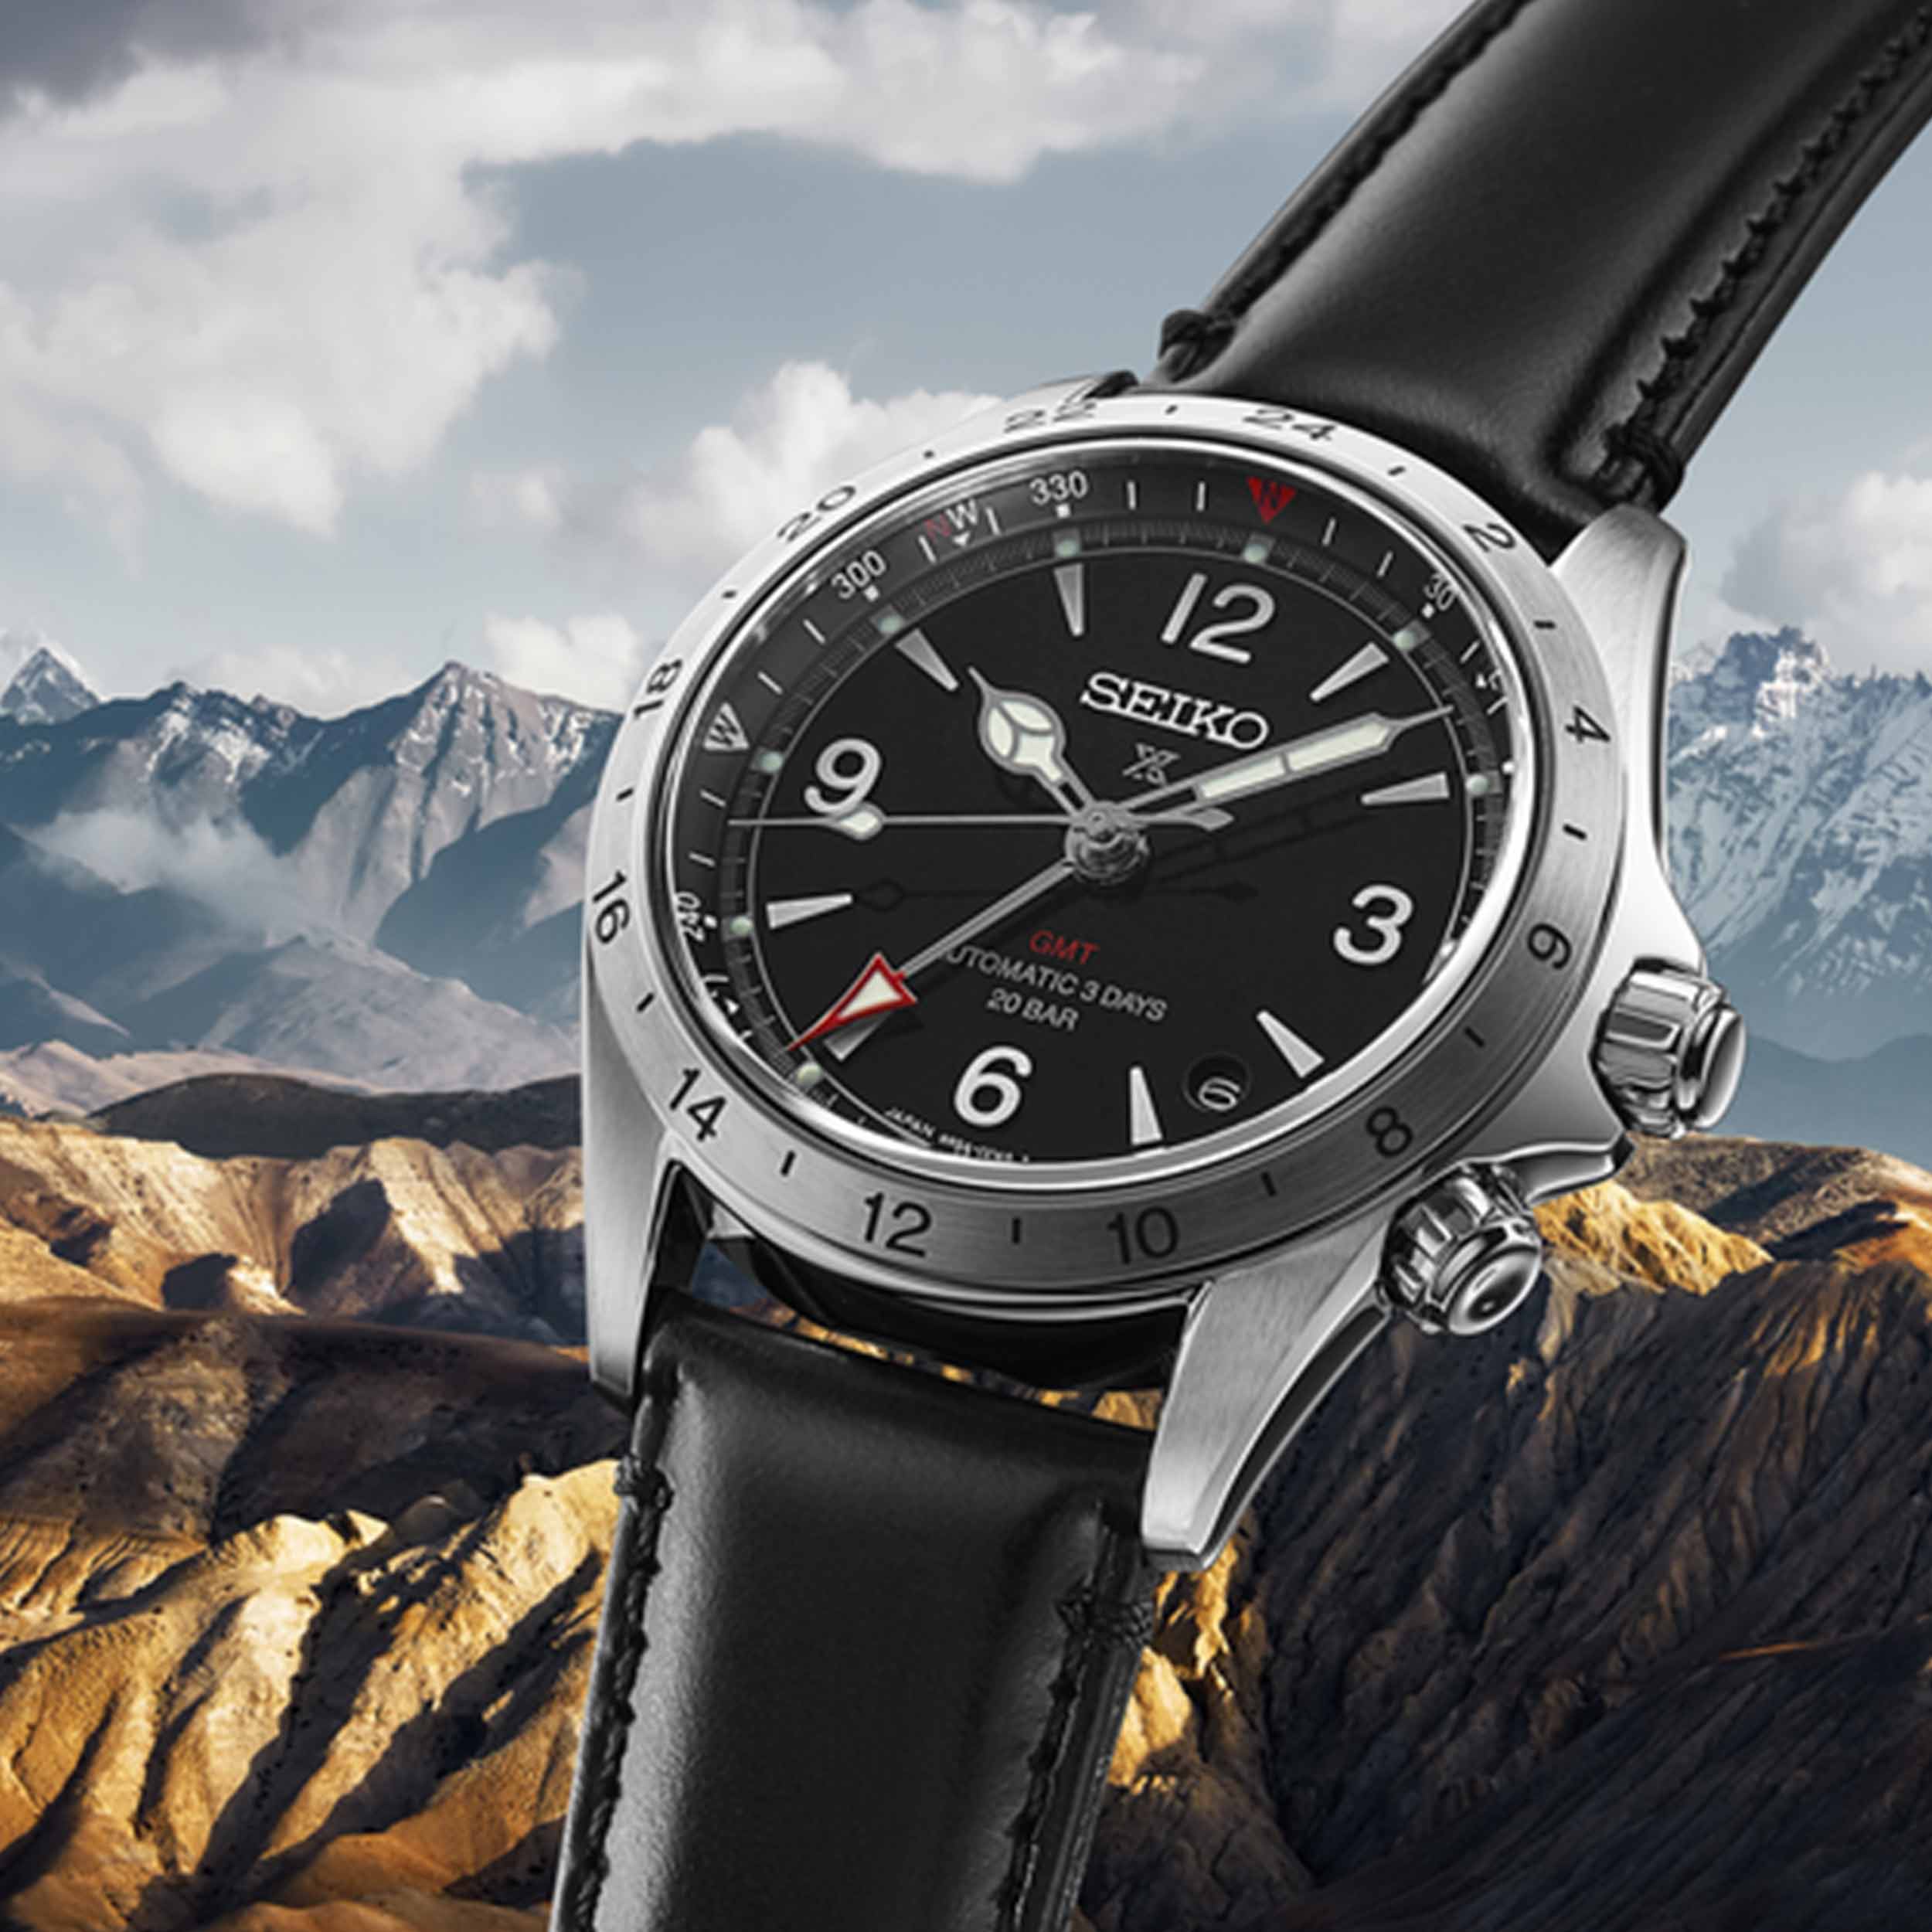 Seiko Brings the 6R54 GMT Caliber to the Alpinist Family - Worn